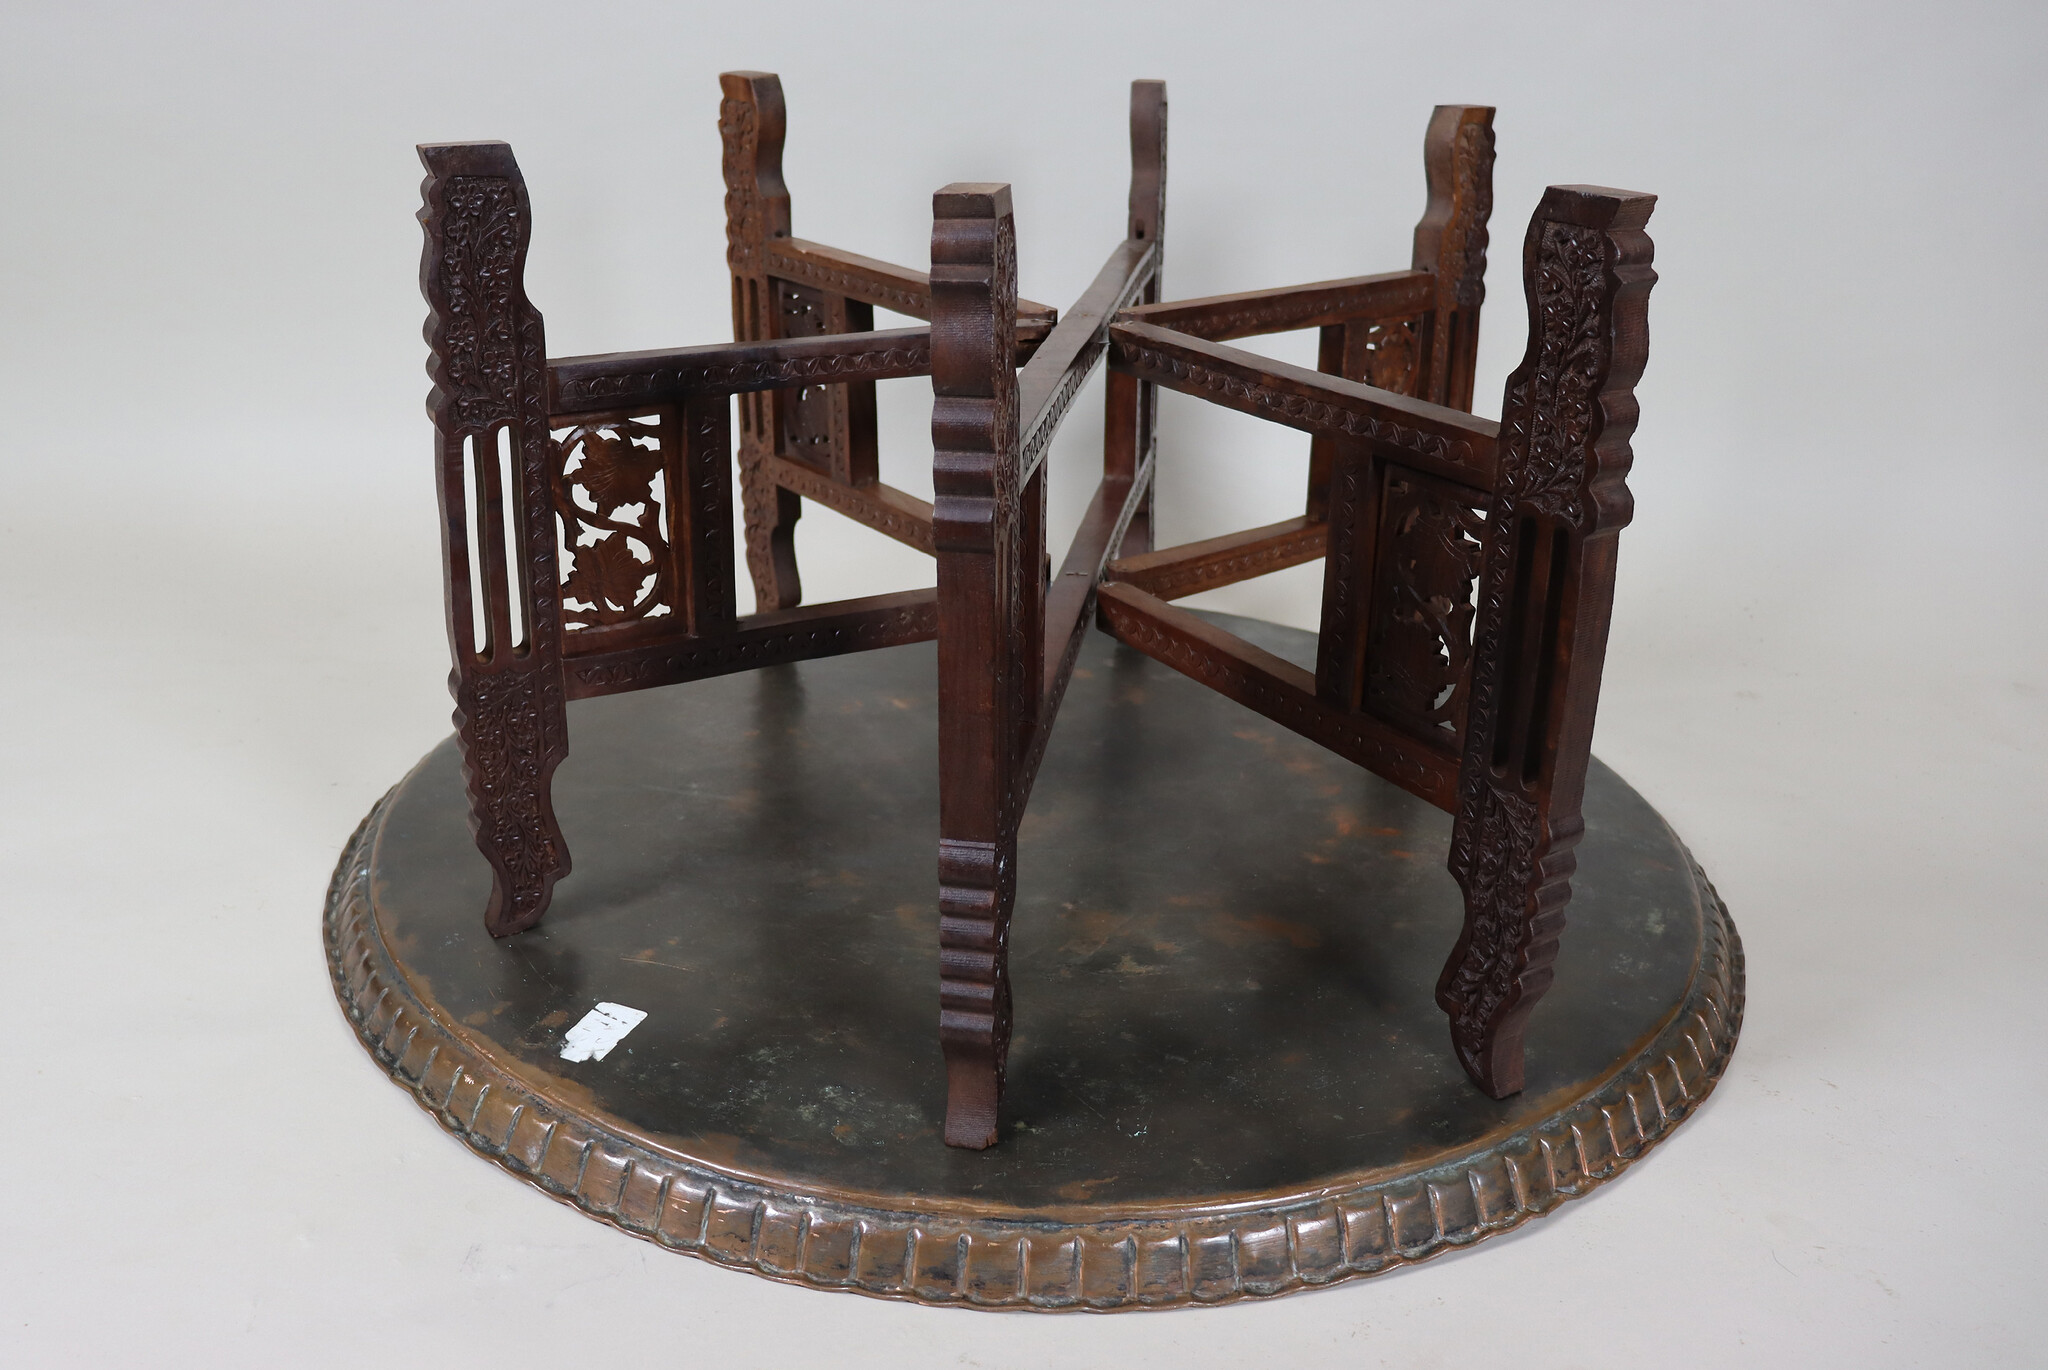 93  cm Ø  Antique ottoman orient Islamic  Hammer Engraved Copper table Tea table side table Tray from Afghanistan  No-HH - HH22A